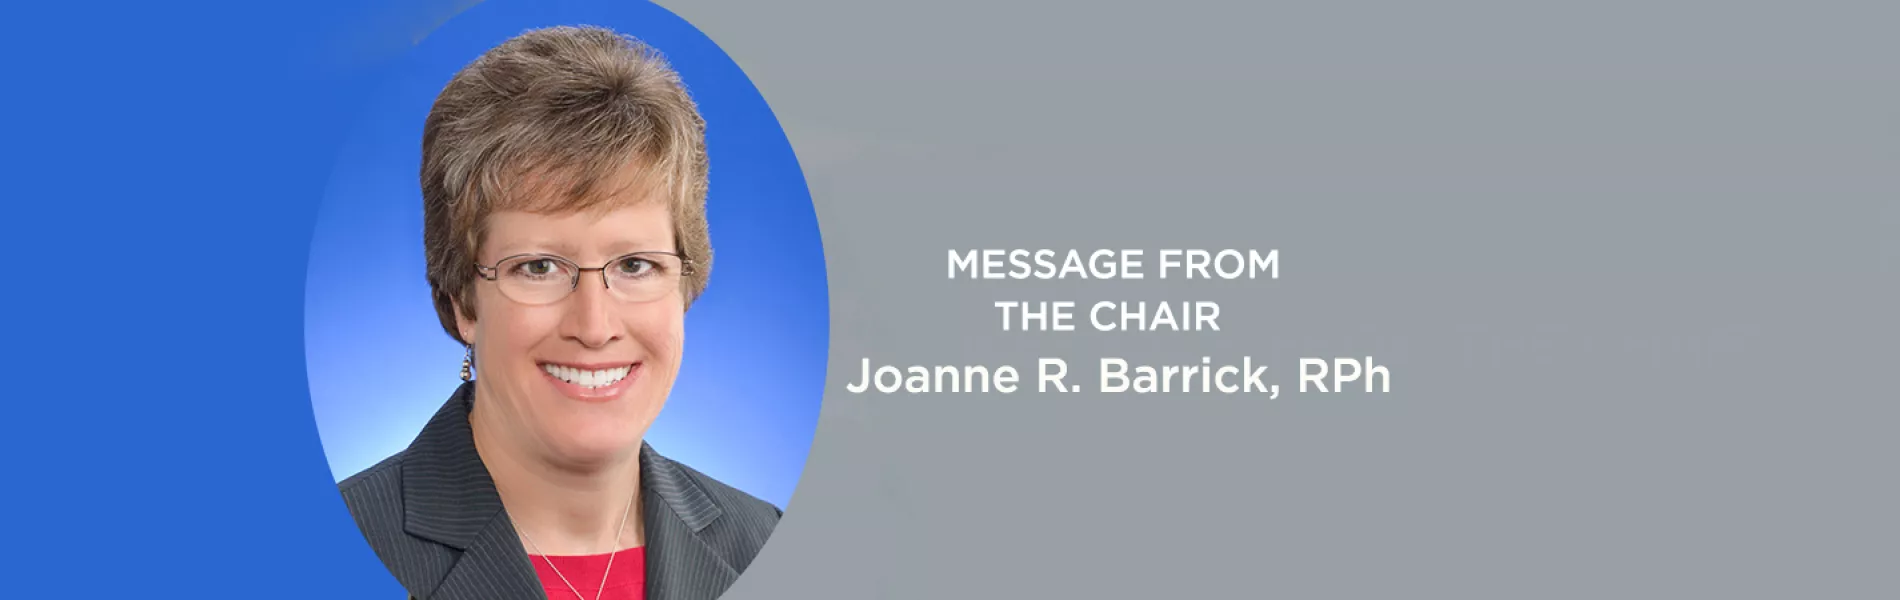 Message from the Chair: The Greatest Spectacle in Pharma